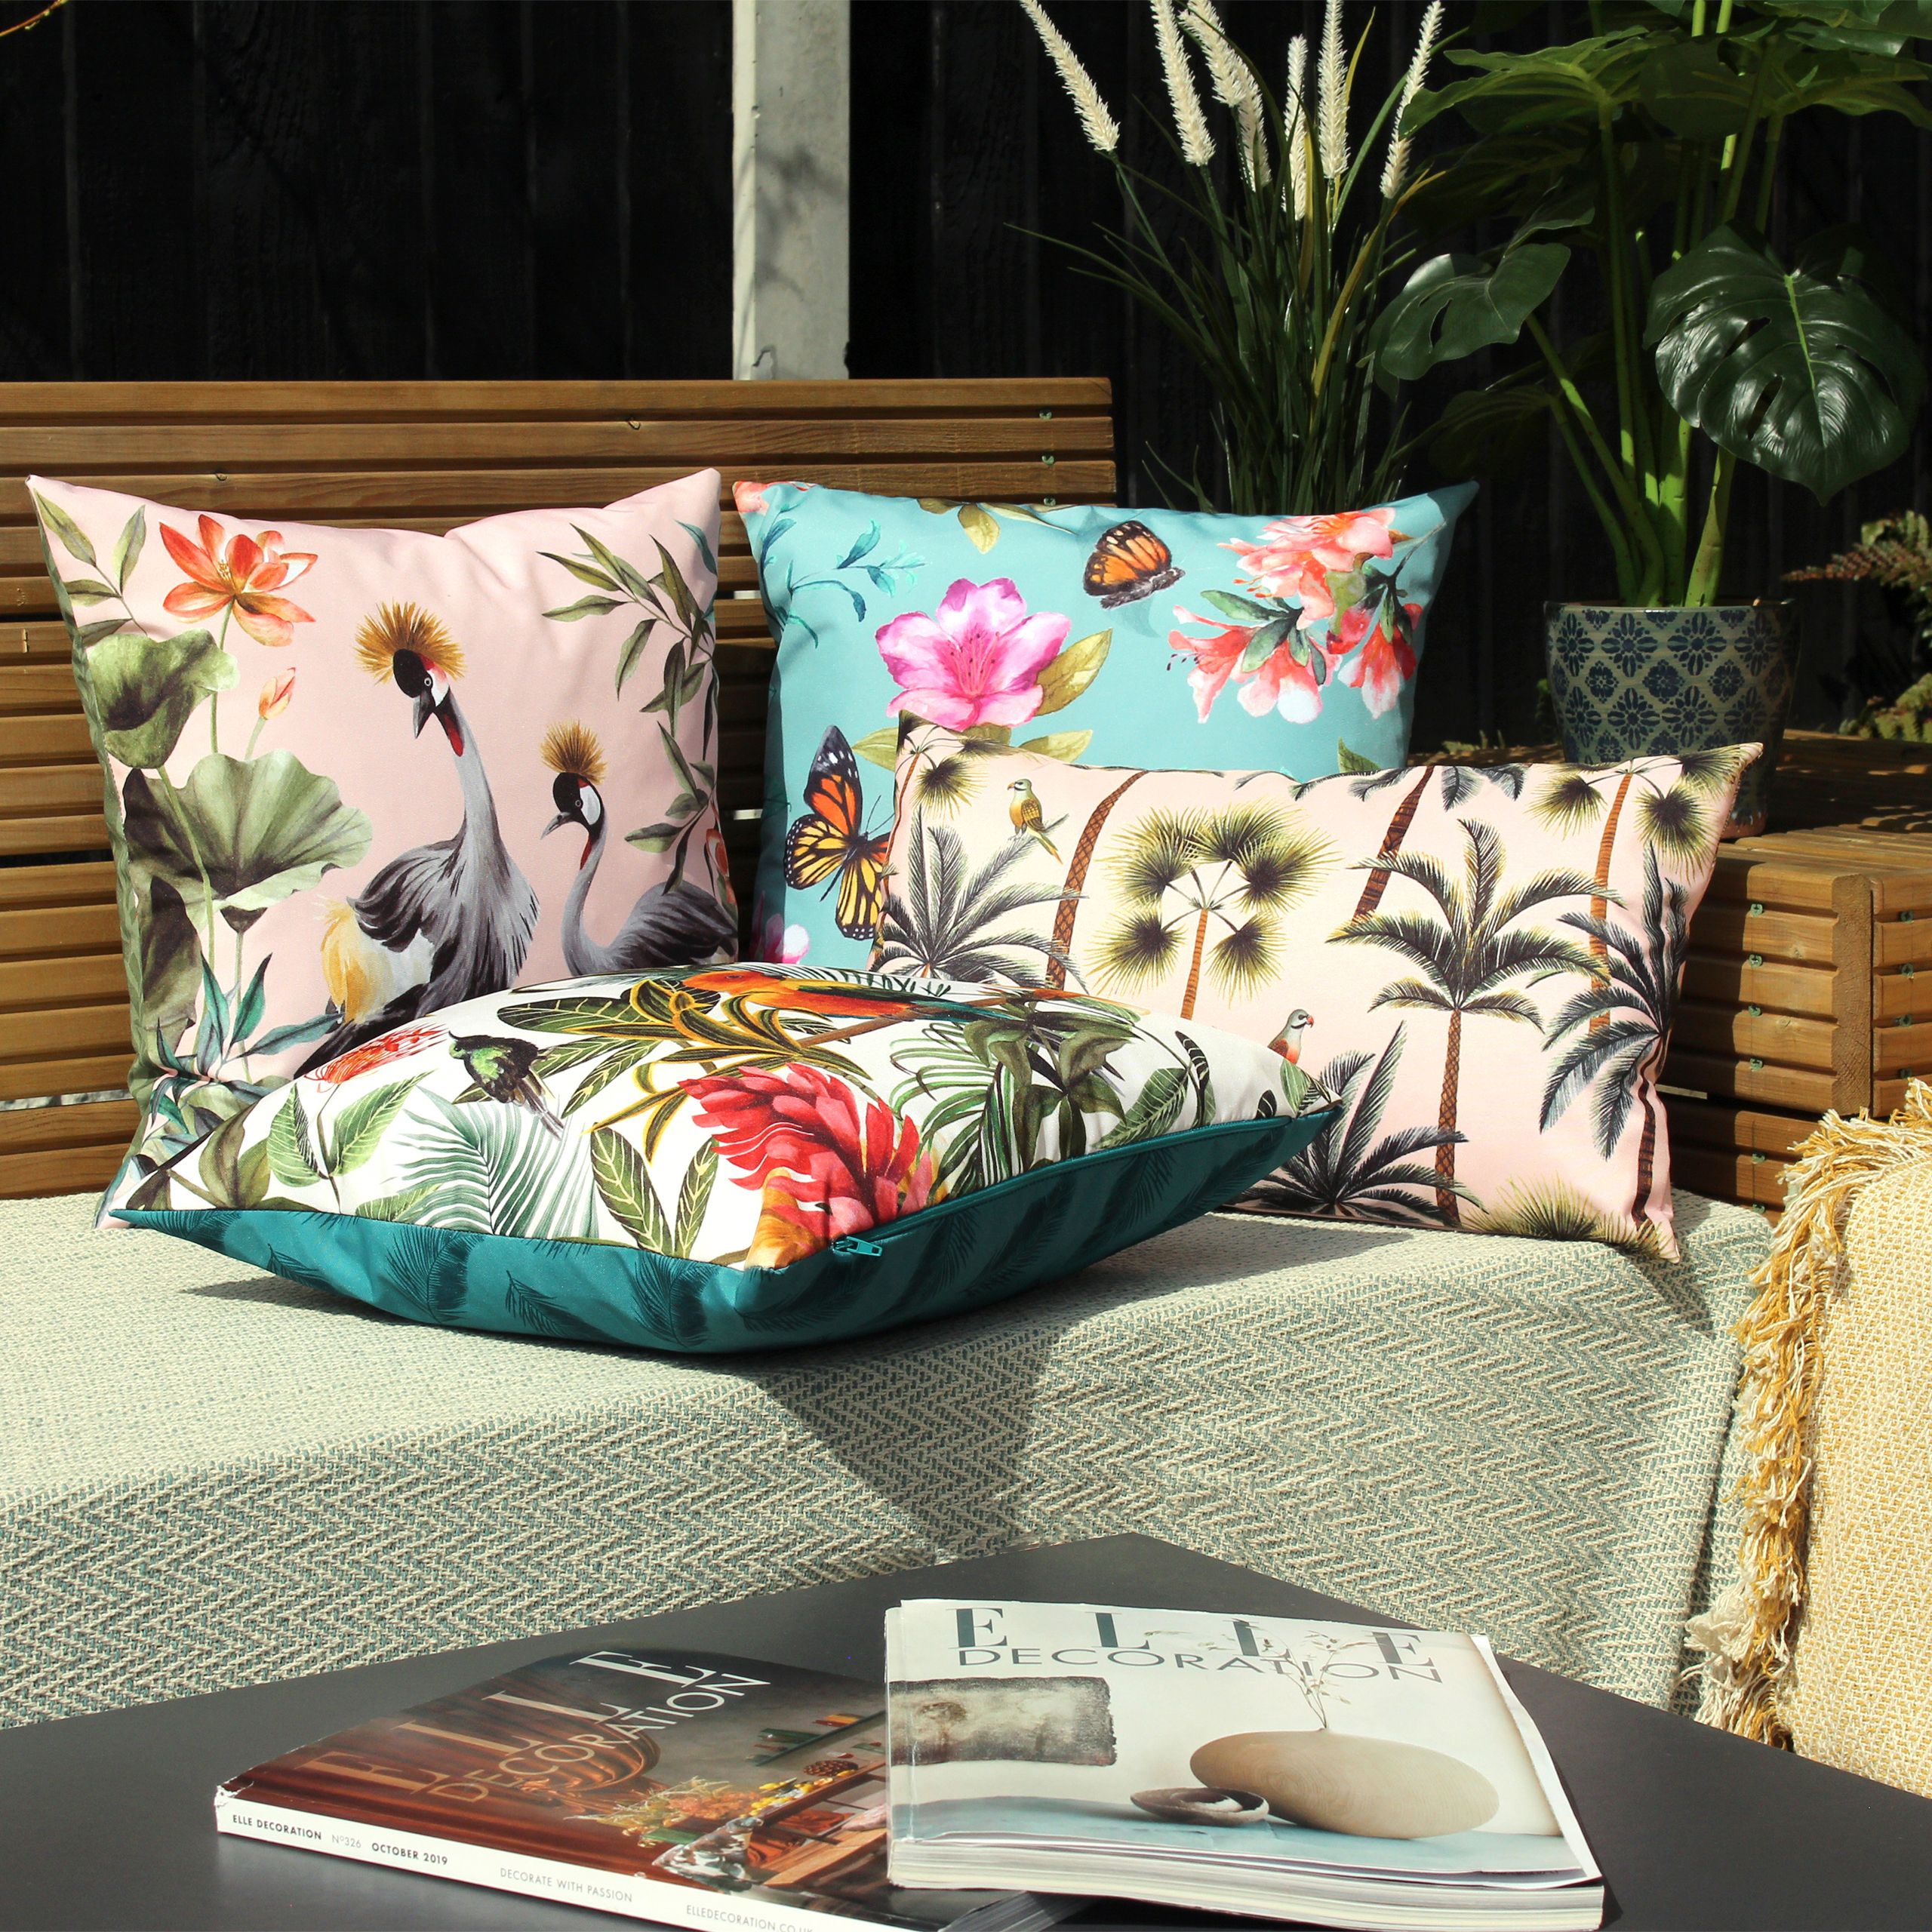 Bring the tropical feels to your outdoor space. This fully reversible design in beautiful pink and green tones is sure to stand out in any garden.